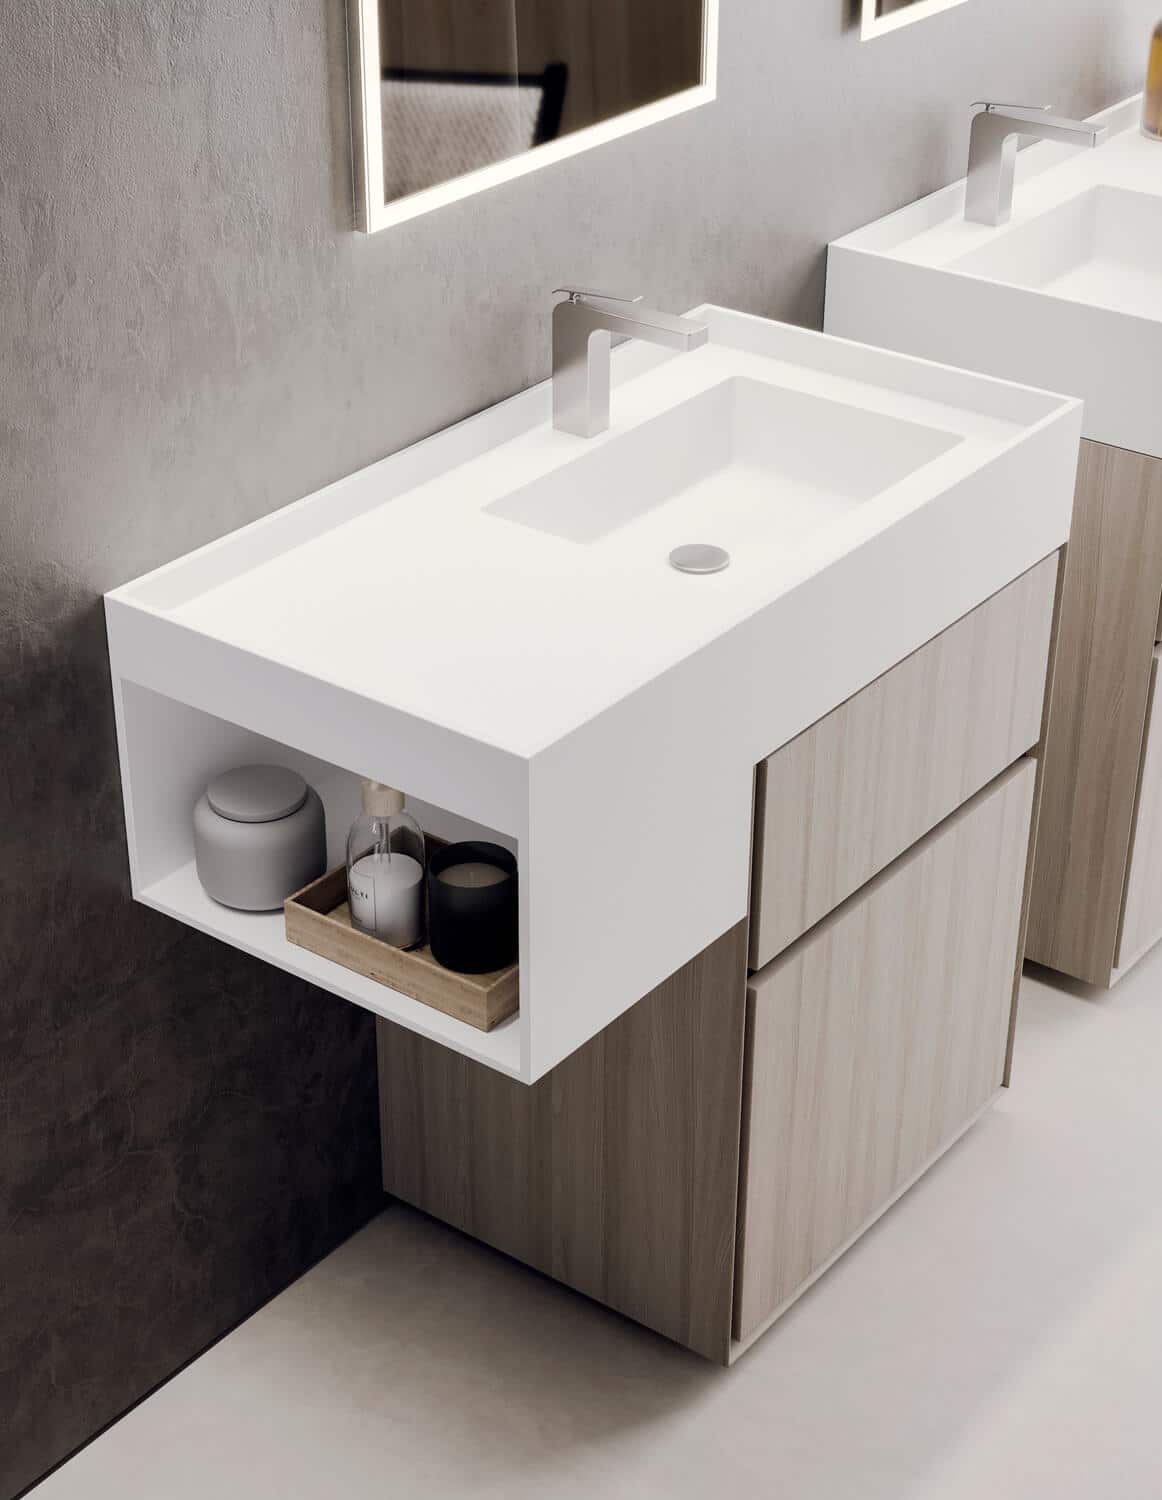 Detail of the side storage unit for frequently used items and the washbasin with all-around anti-drip lip.